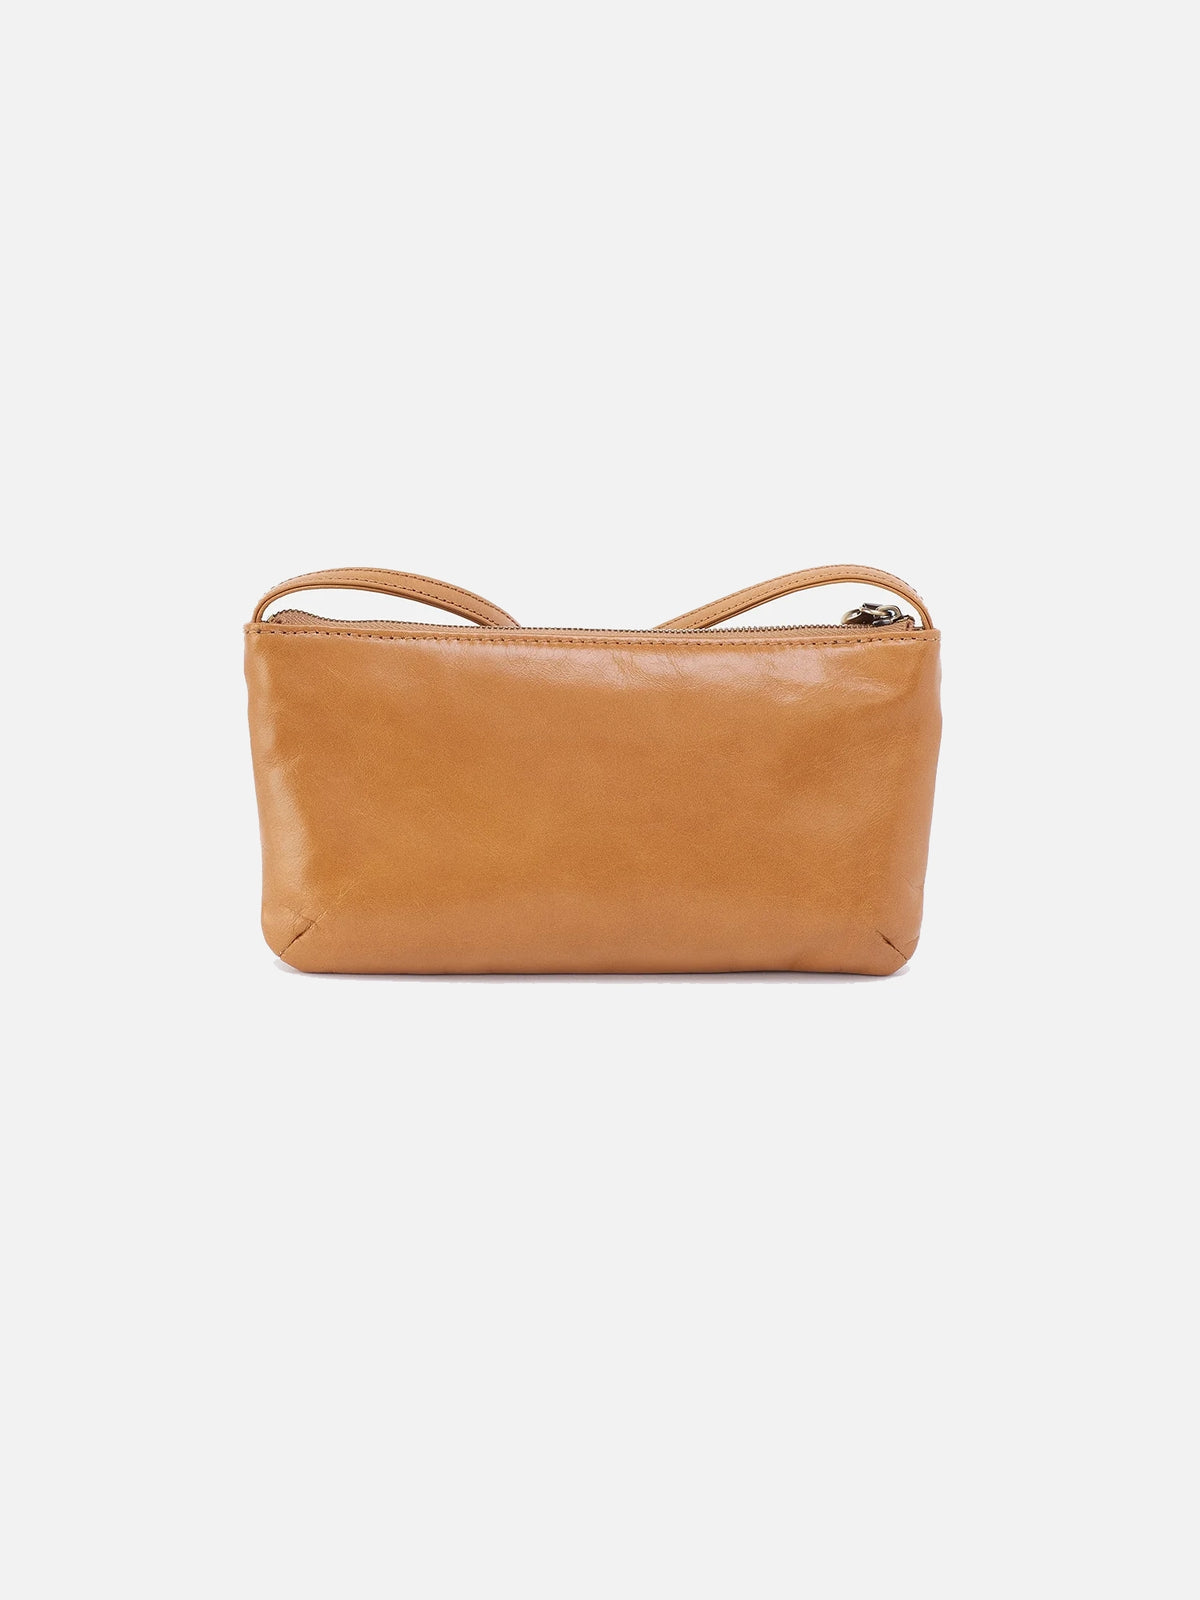 hobo cara crossbody bag in natural polished leather